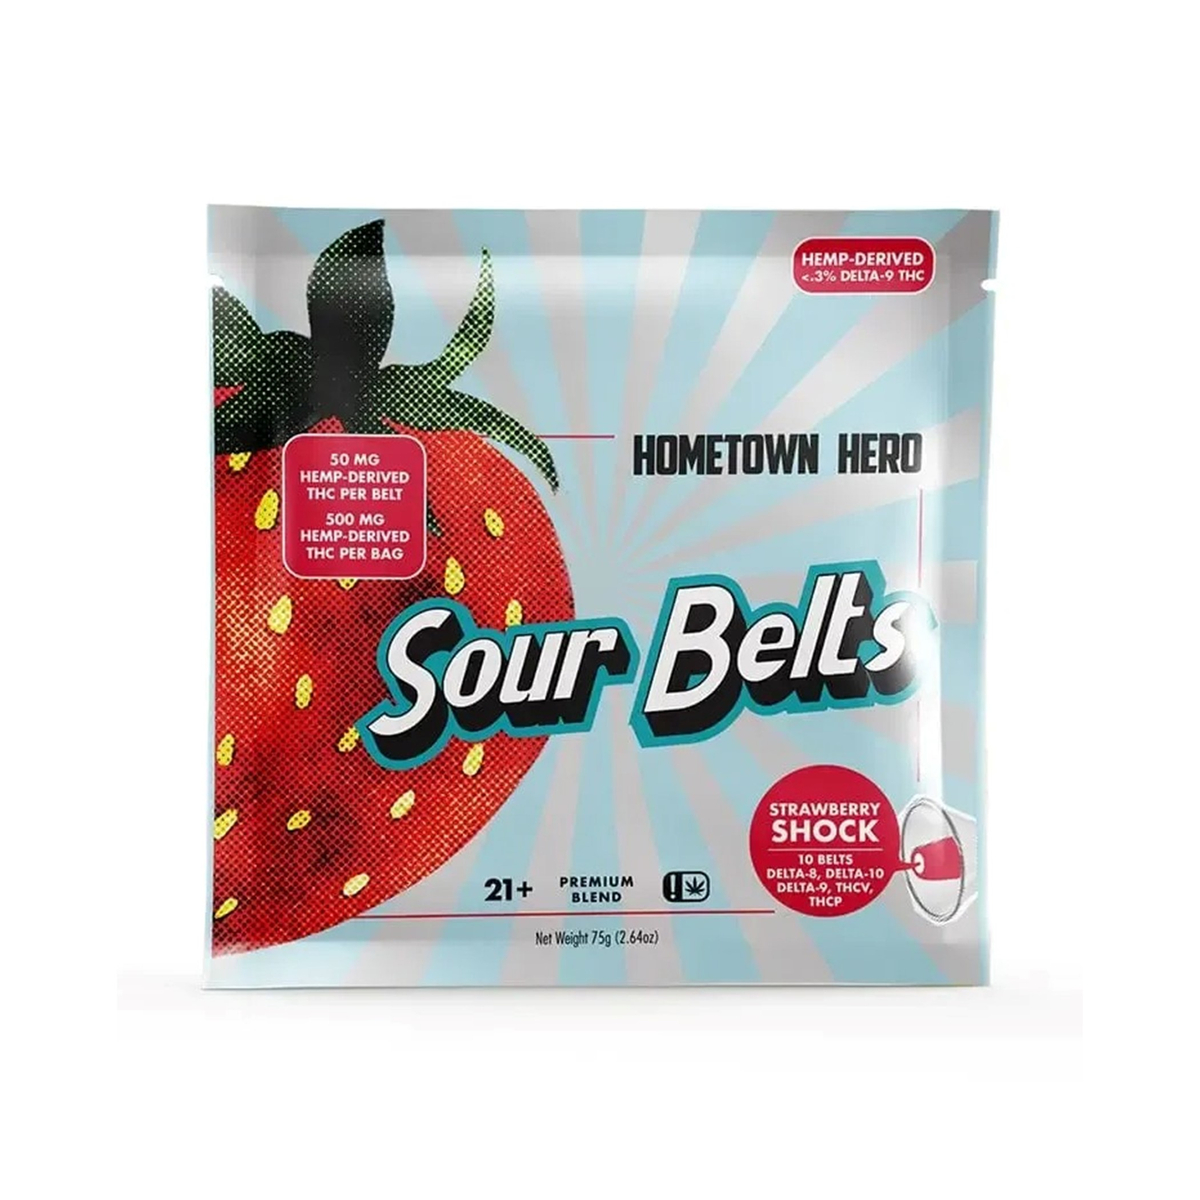 featured image thumbnail for post Hometown Hero Strawberry Shock Sour Belts